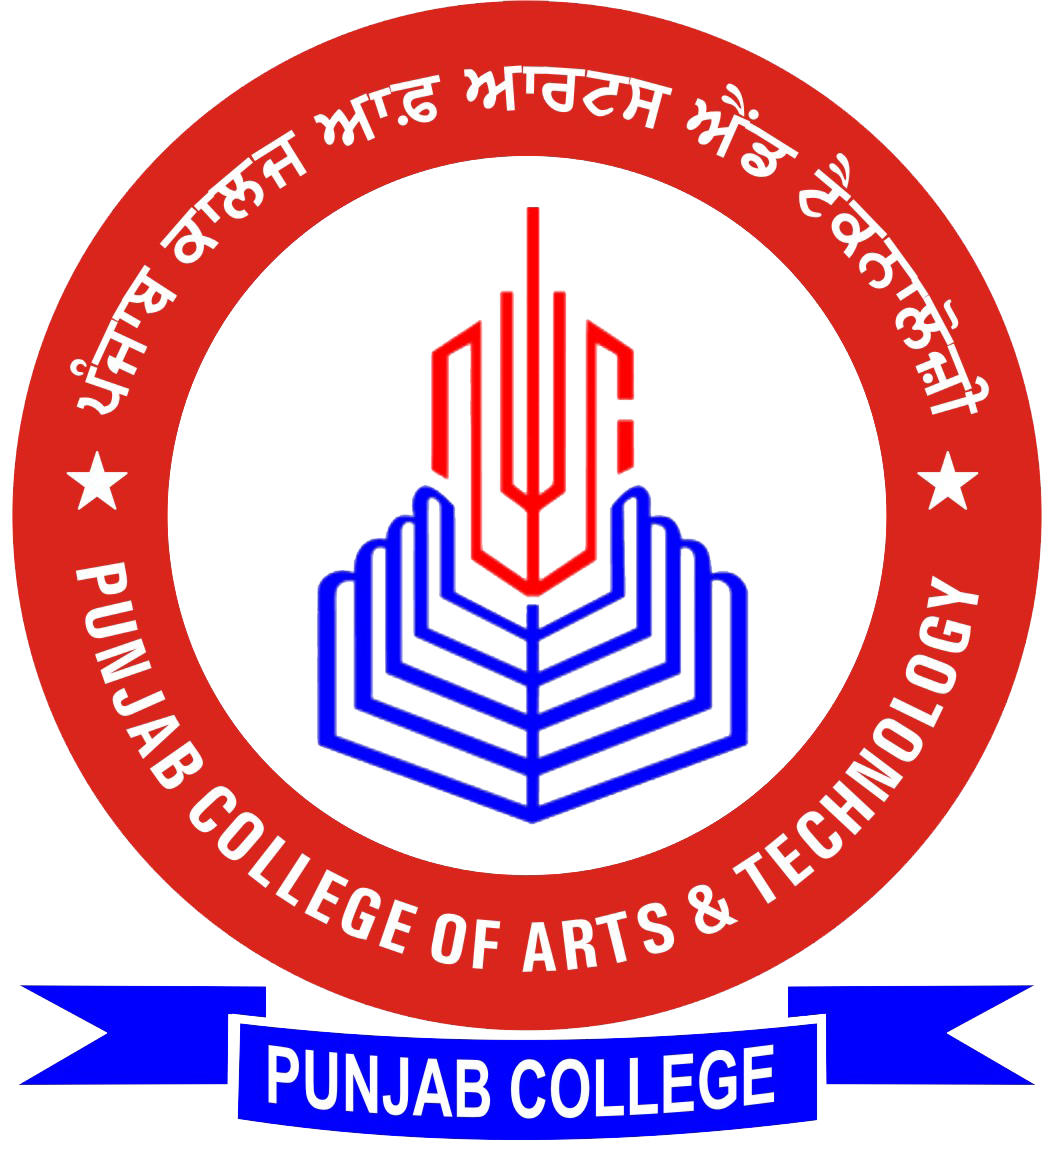 Punjab College of Arts & Technology|Colleges|Education